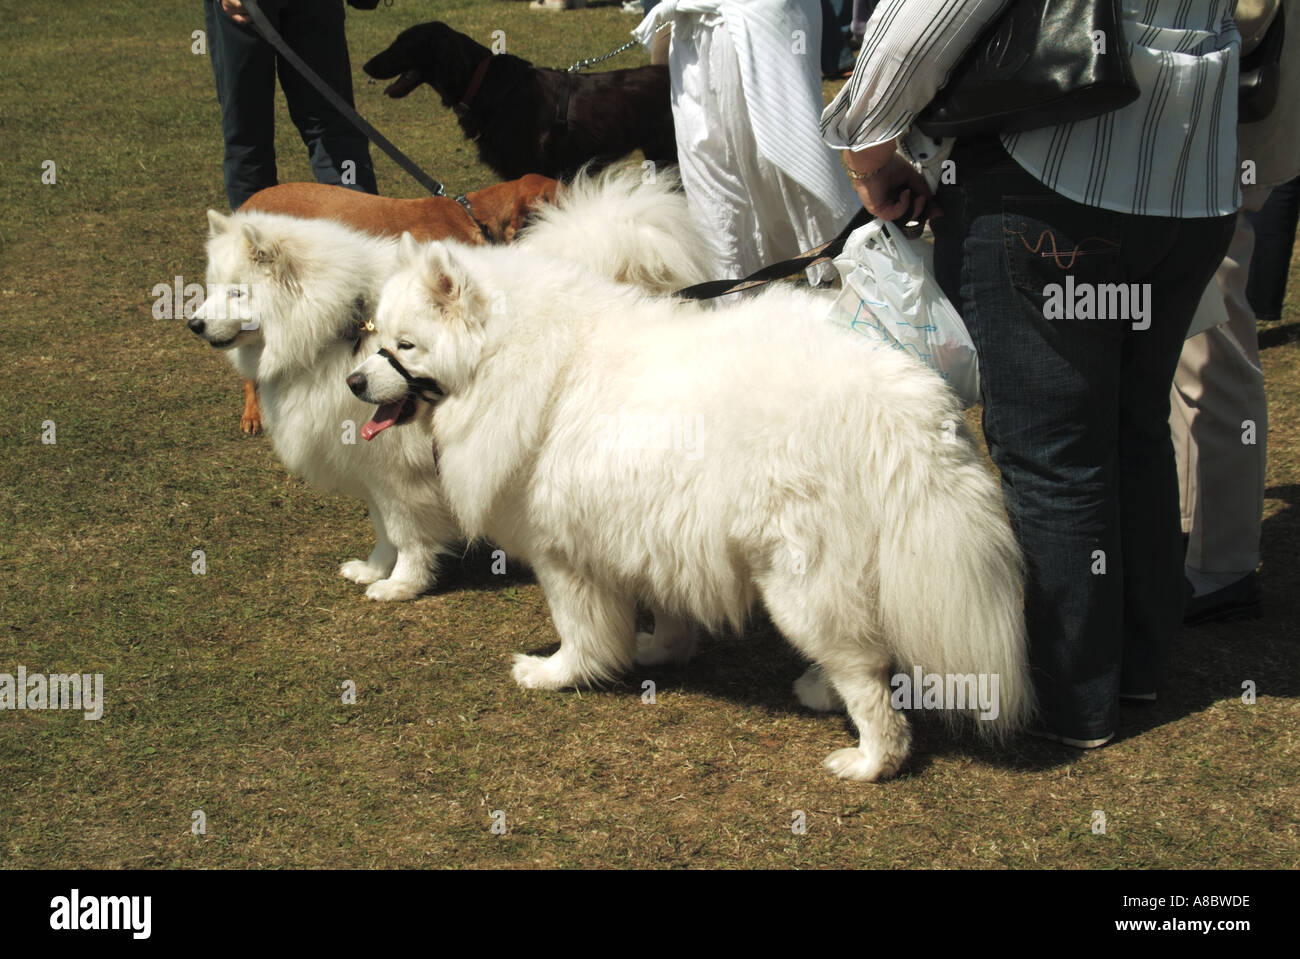 England dog show event pair of Samoyed with owners includes training lead around mouth Stock Photo